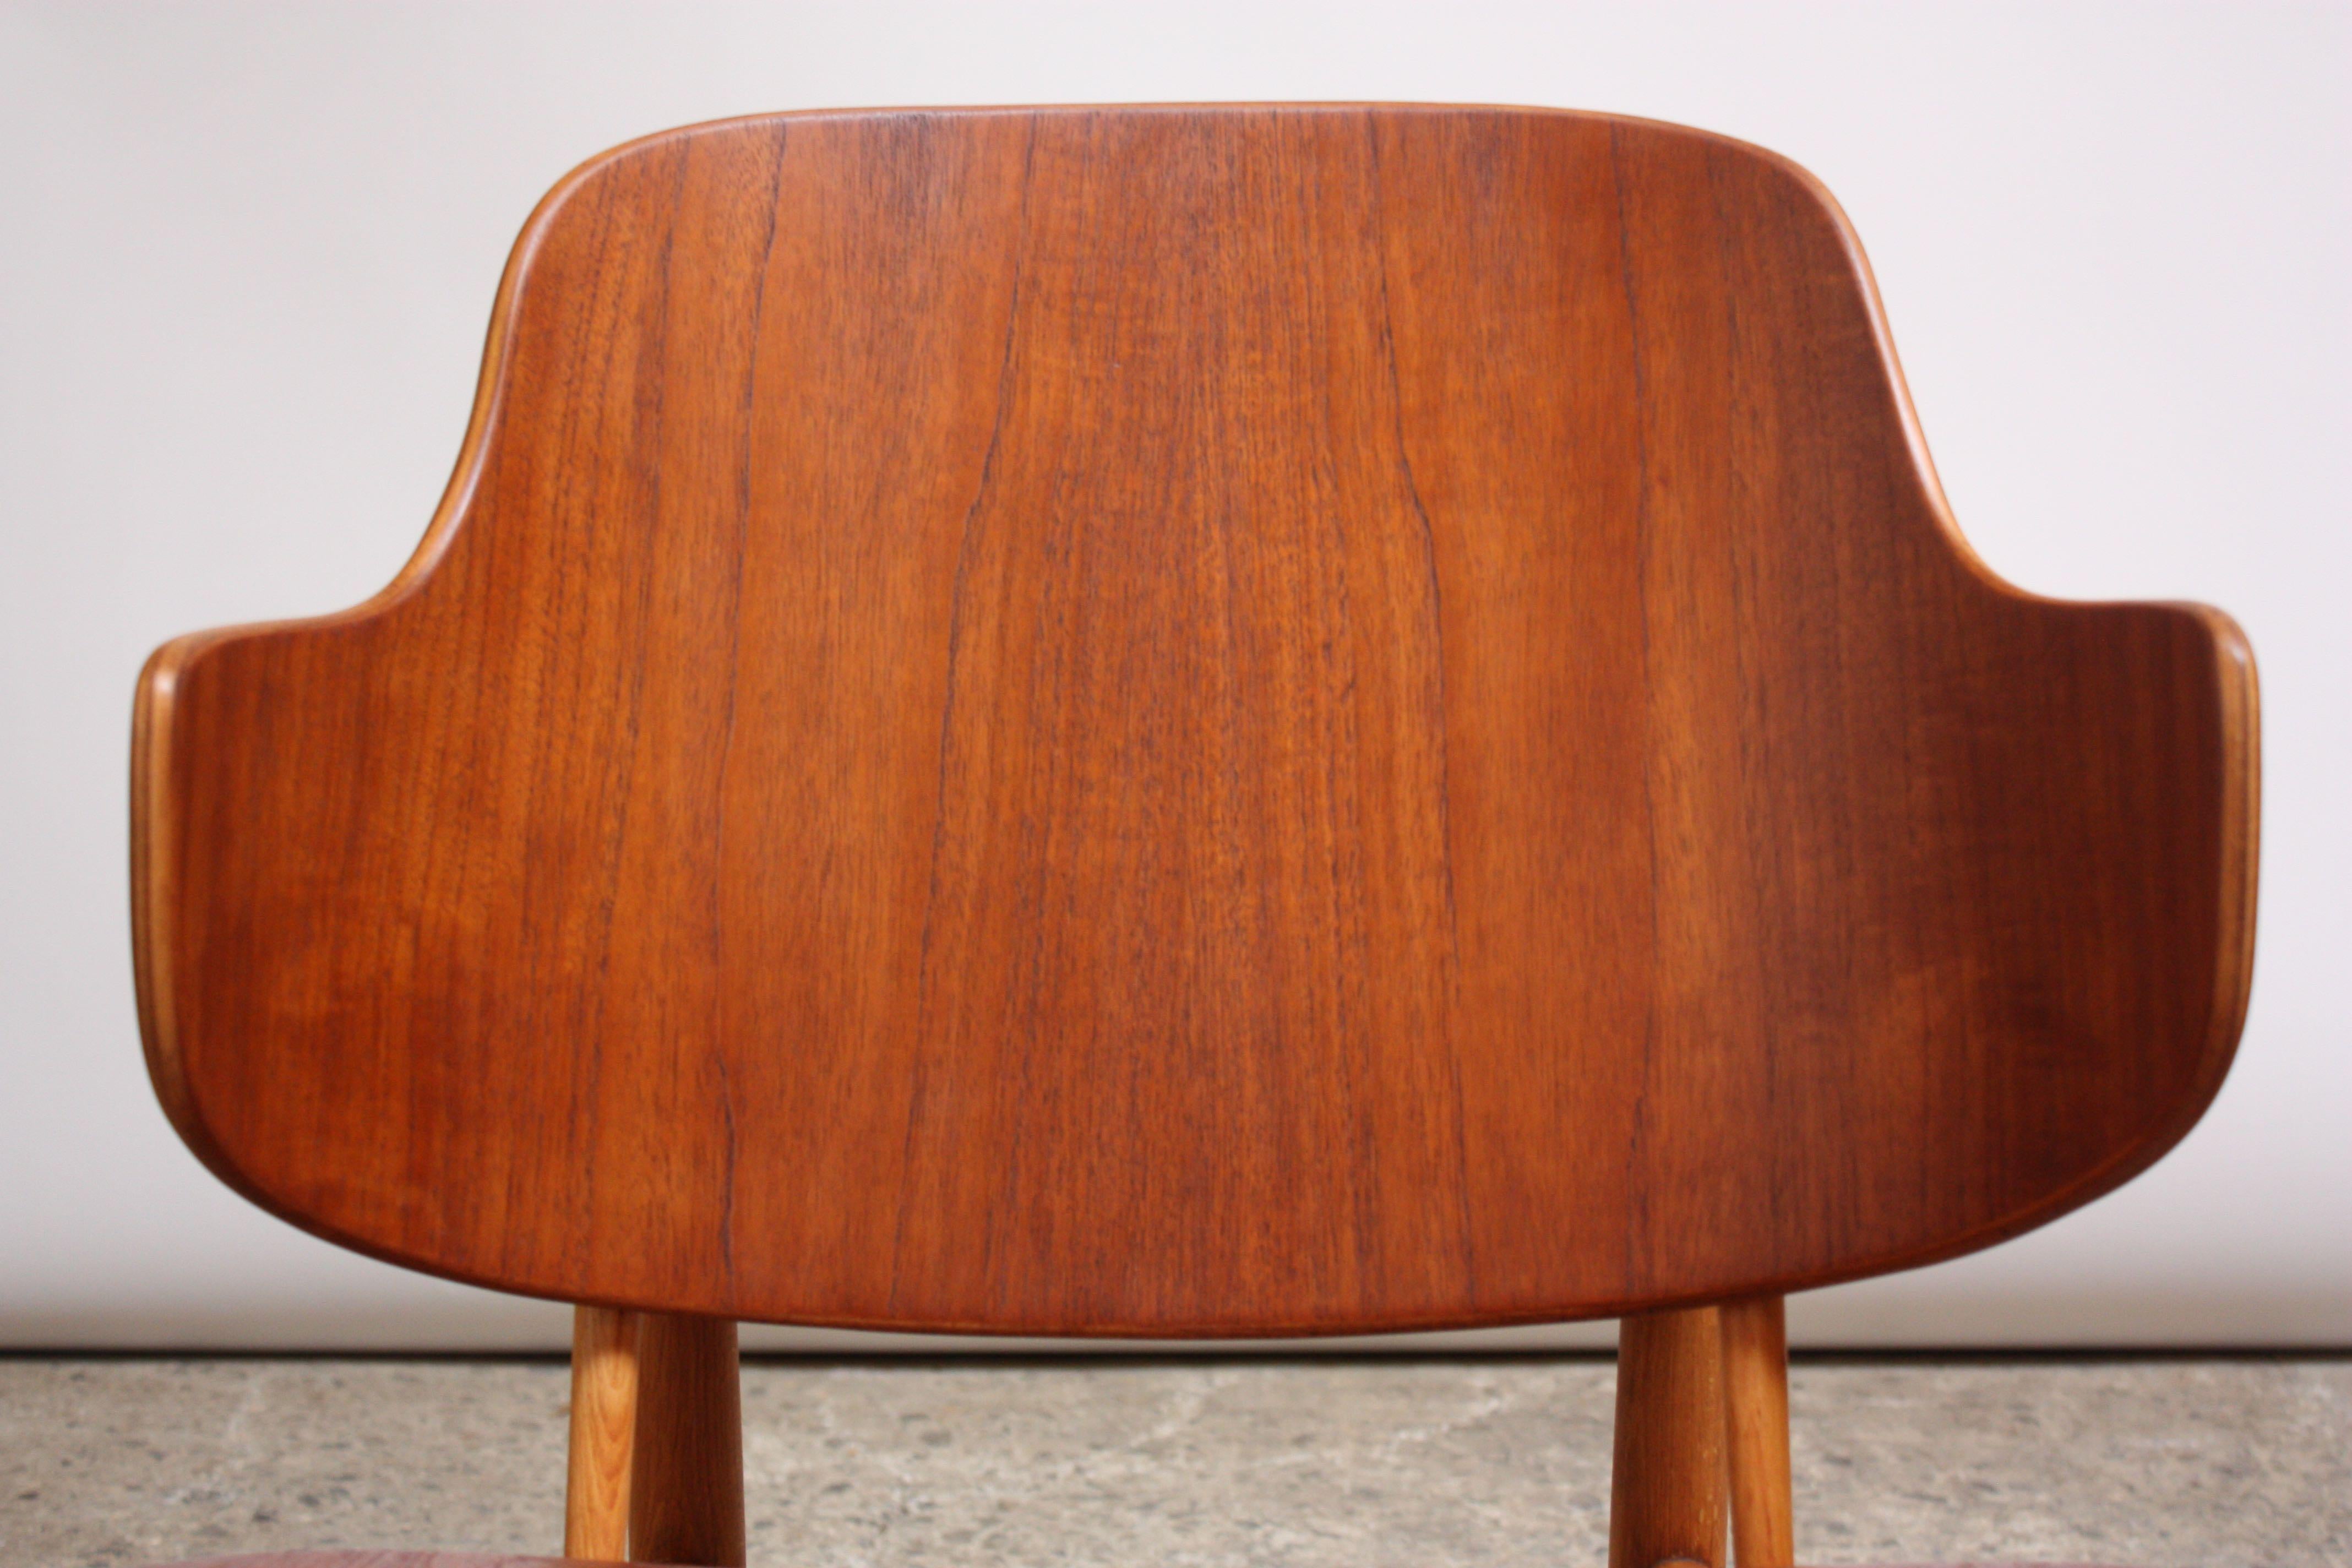 Pair of Danish Sculptural Shell Chairs by Ib Kofod-Larsen in Teak and Beech For Sale 7